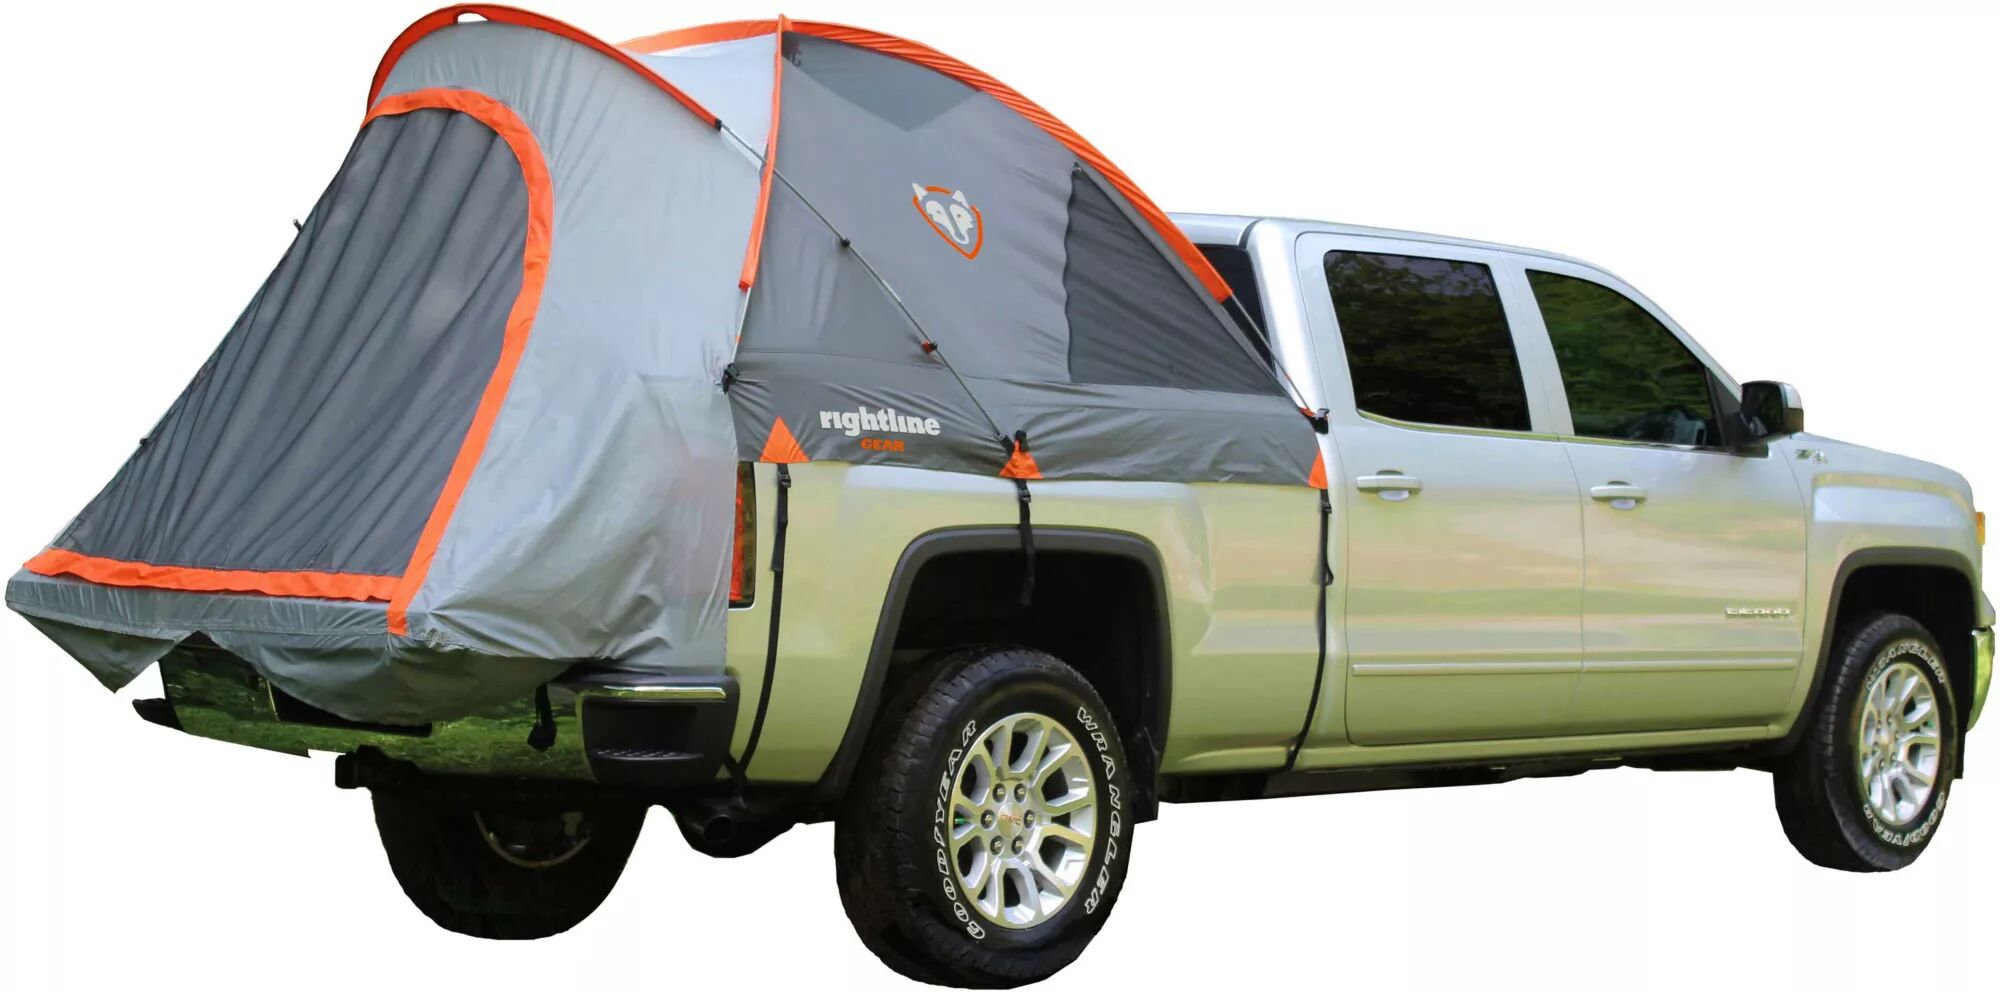 Rightline Gear 2 Person Truck Tent, Mid size short, Gray